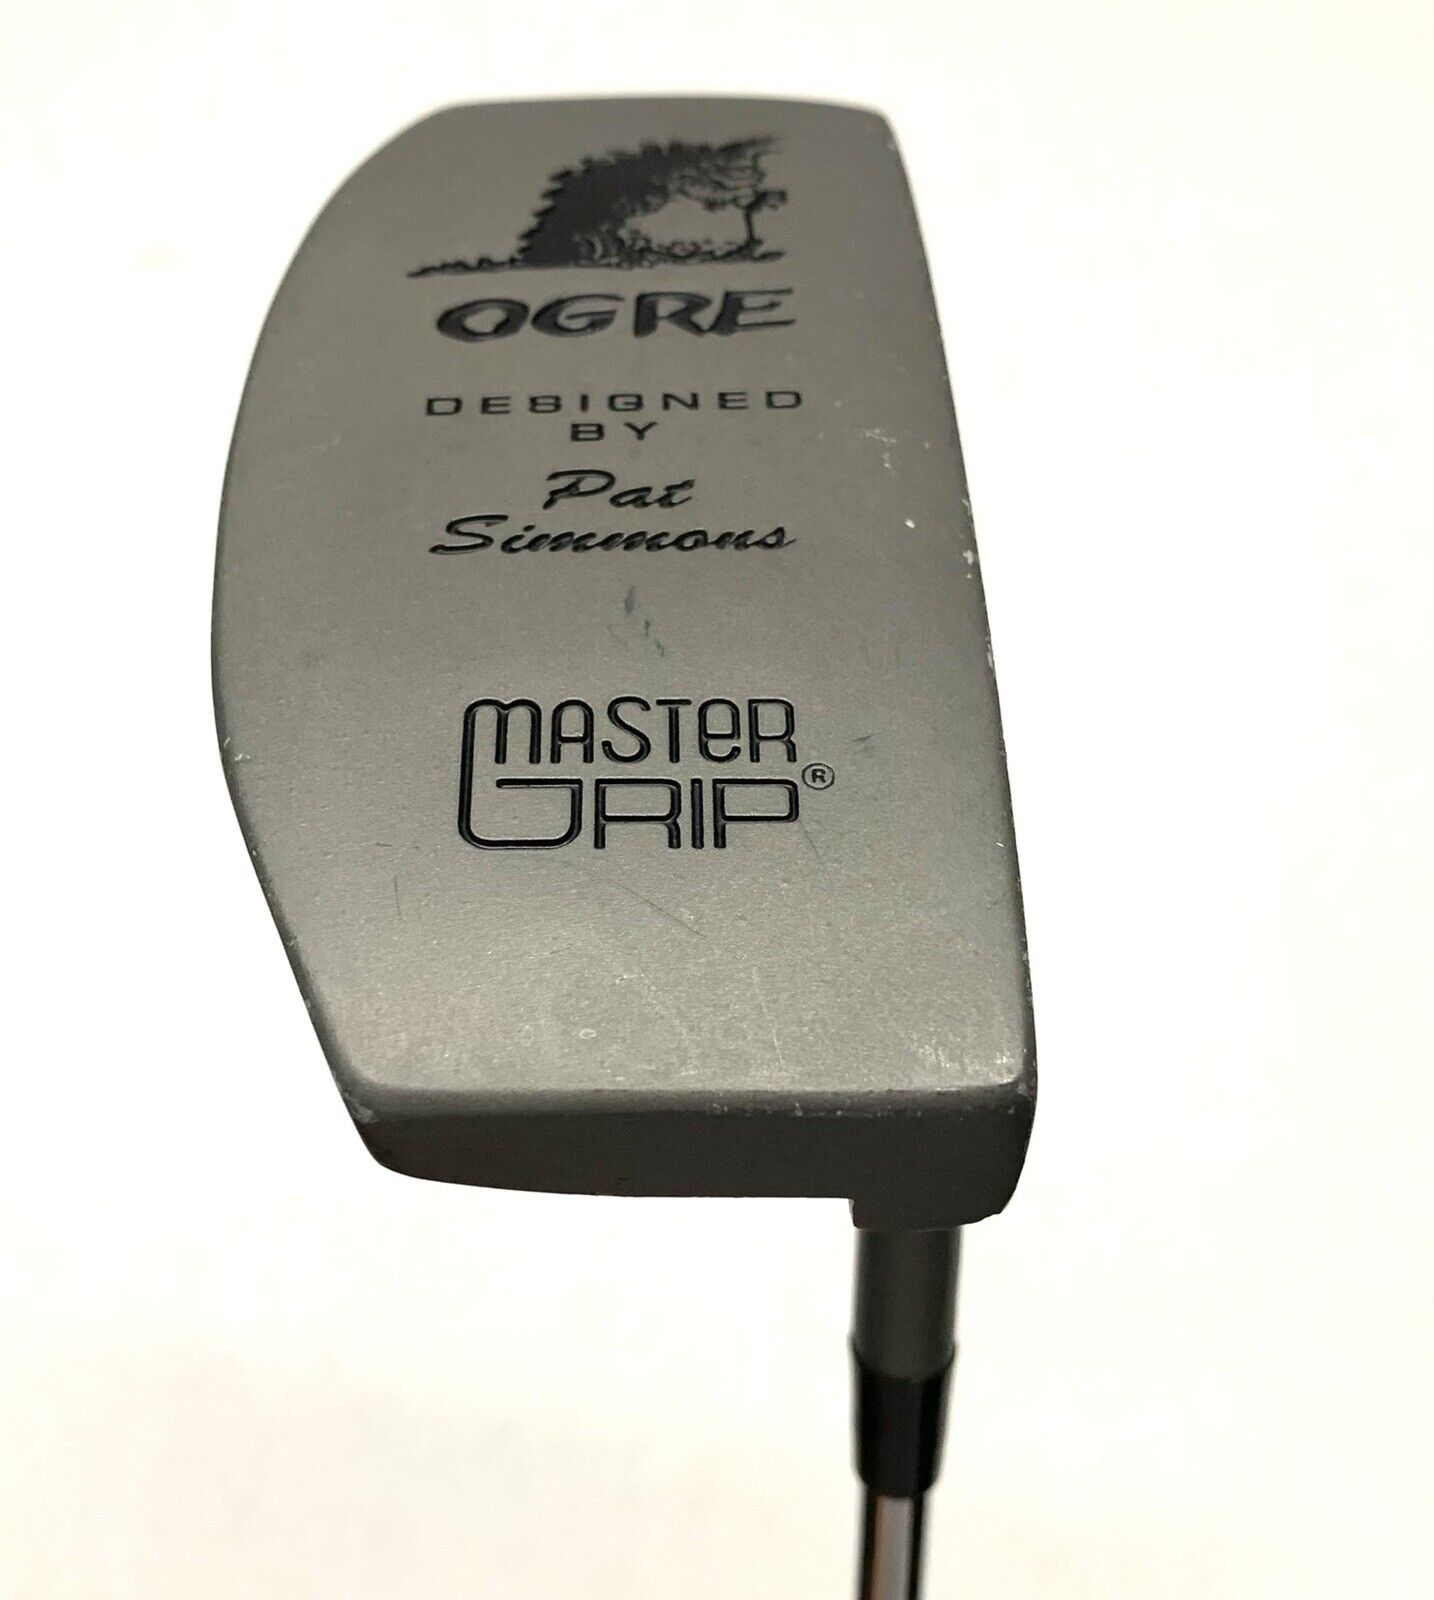 Master Grip Ogre Pat Simmons Putter Right Handed Steel Shaft Headcover Included